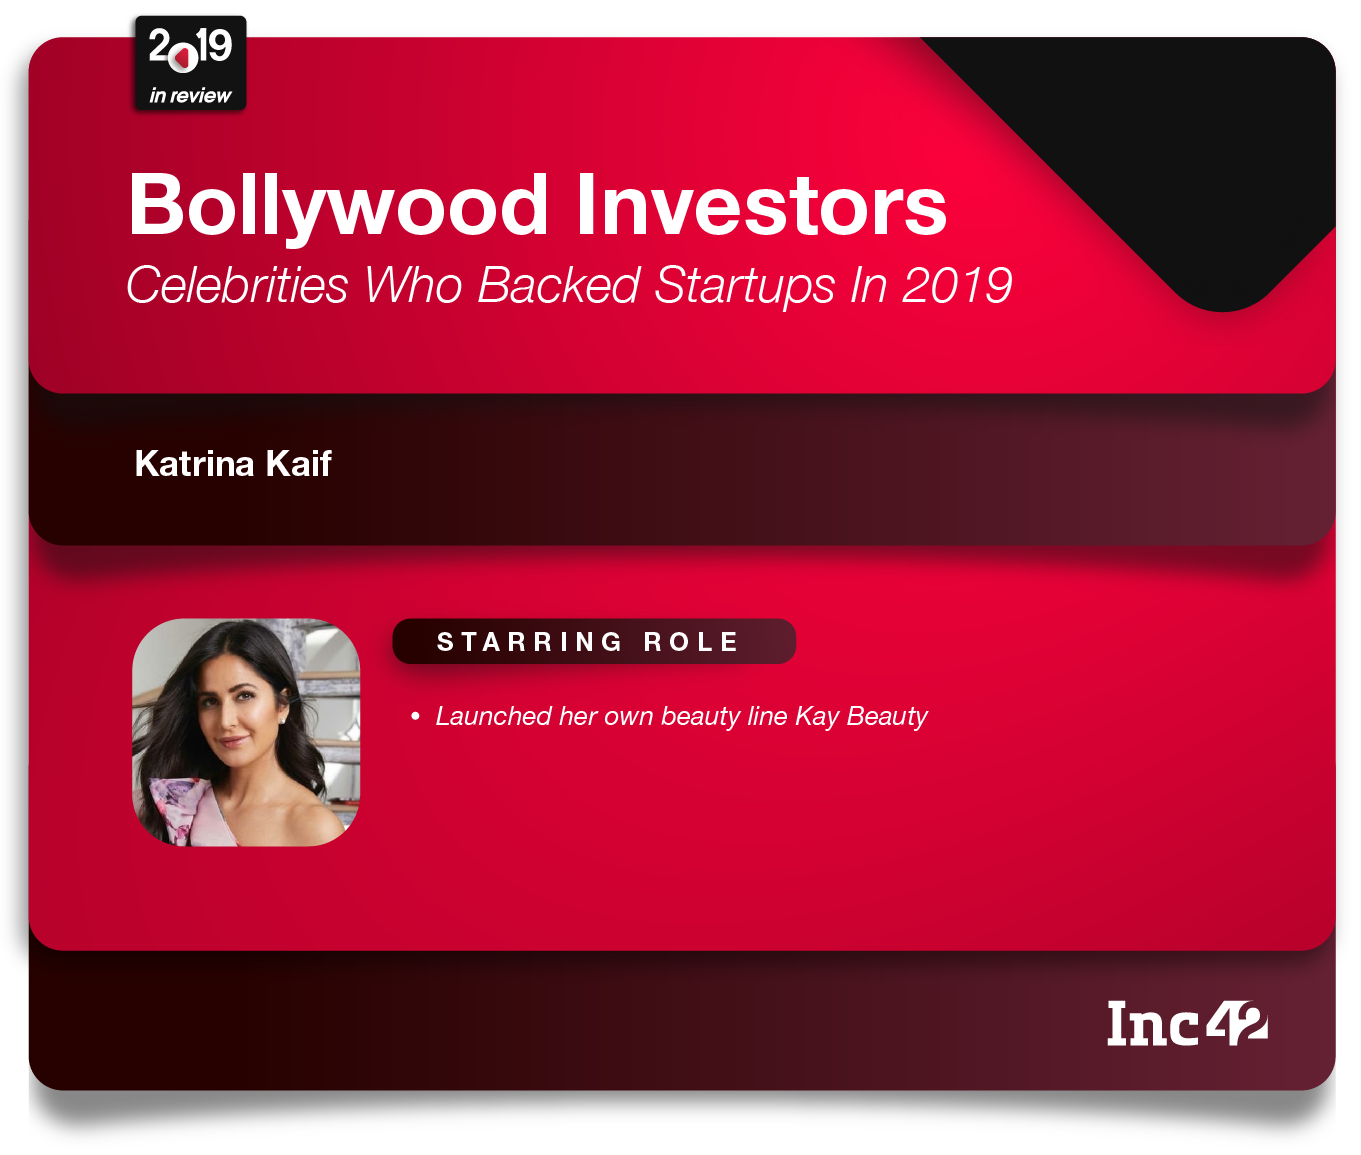 bollywood startups investments